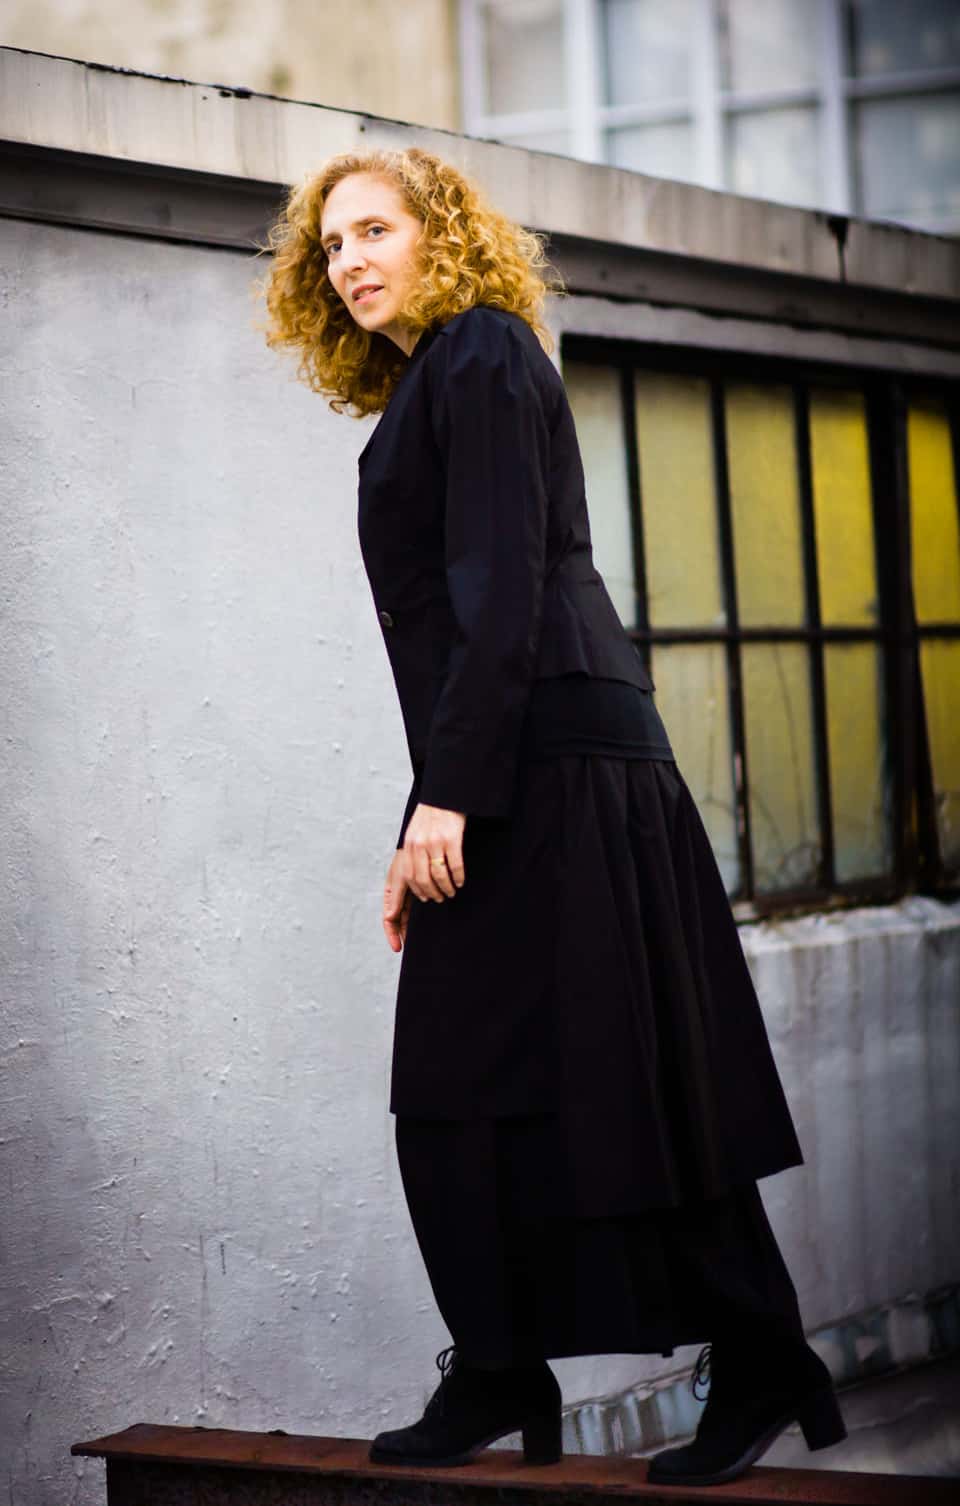 Tanglewood will present acclaimed composer Julia Wolfe' 'Her Story.' Press photo courtesy of the artist